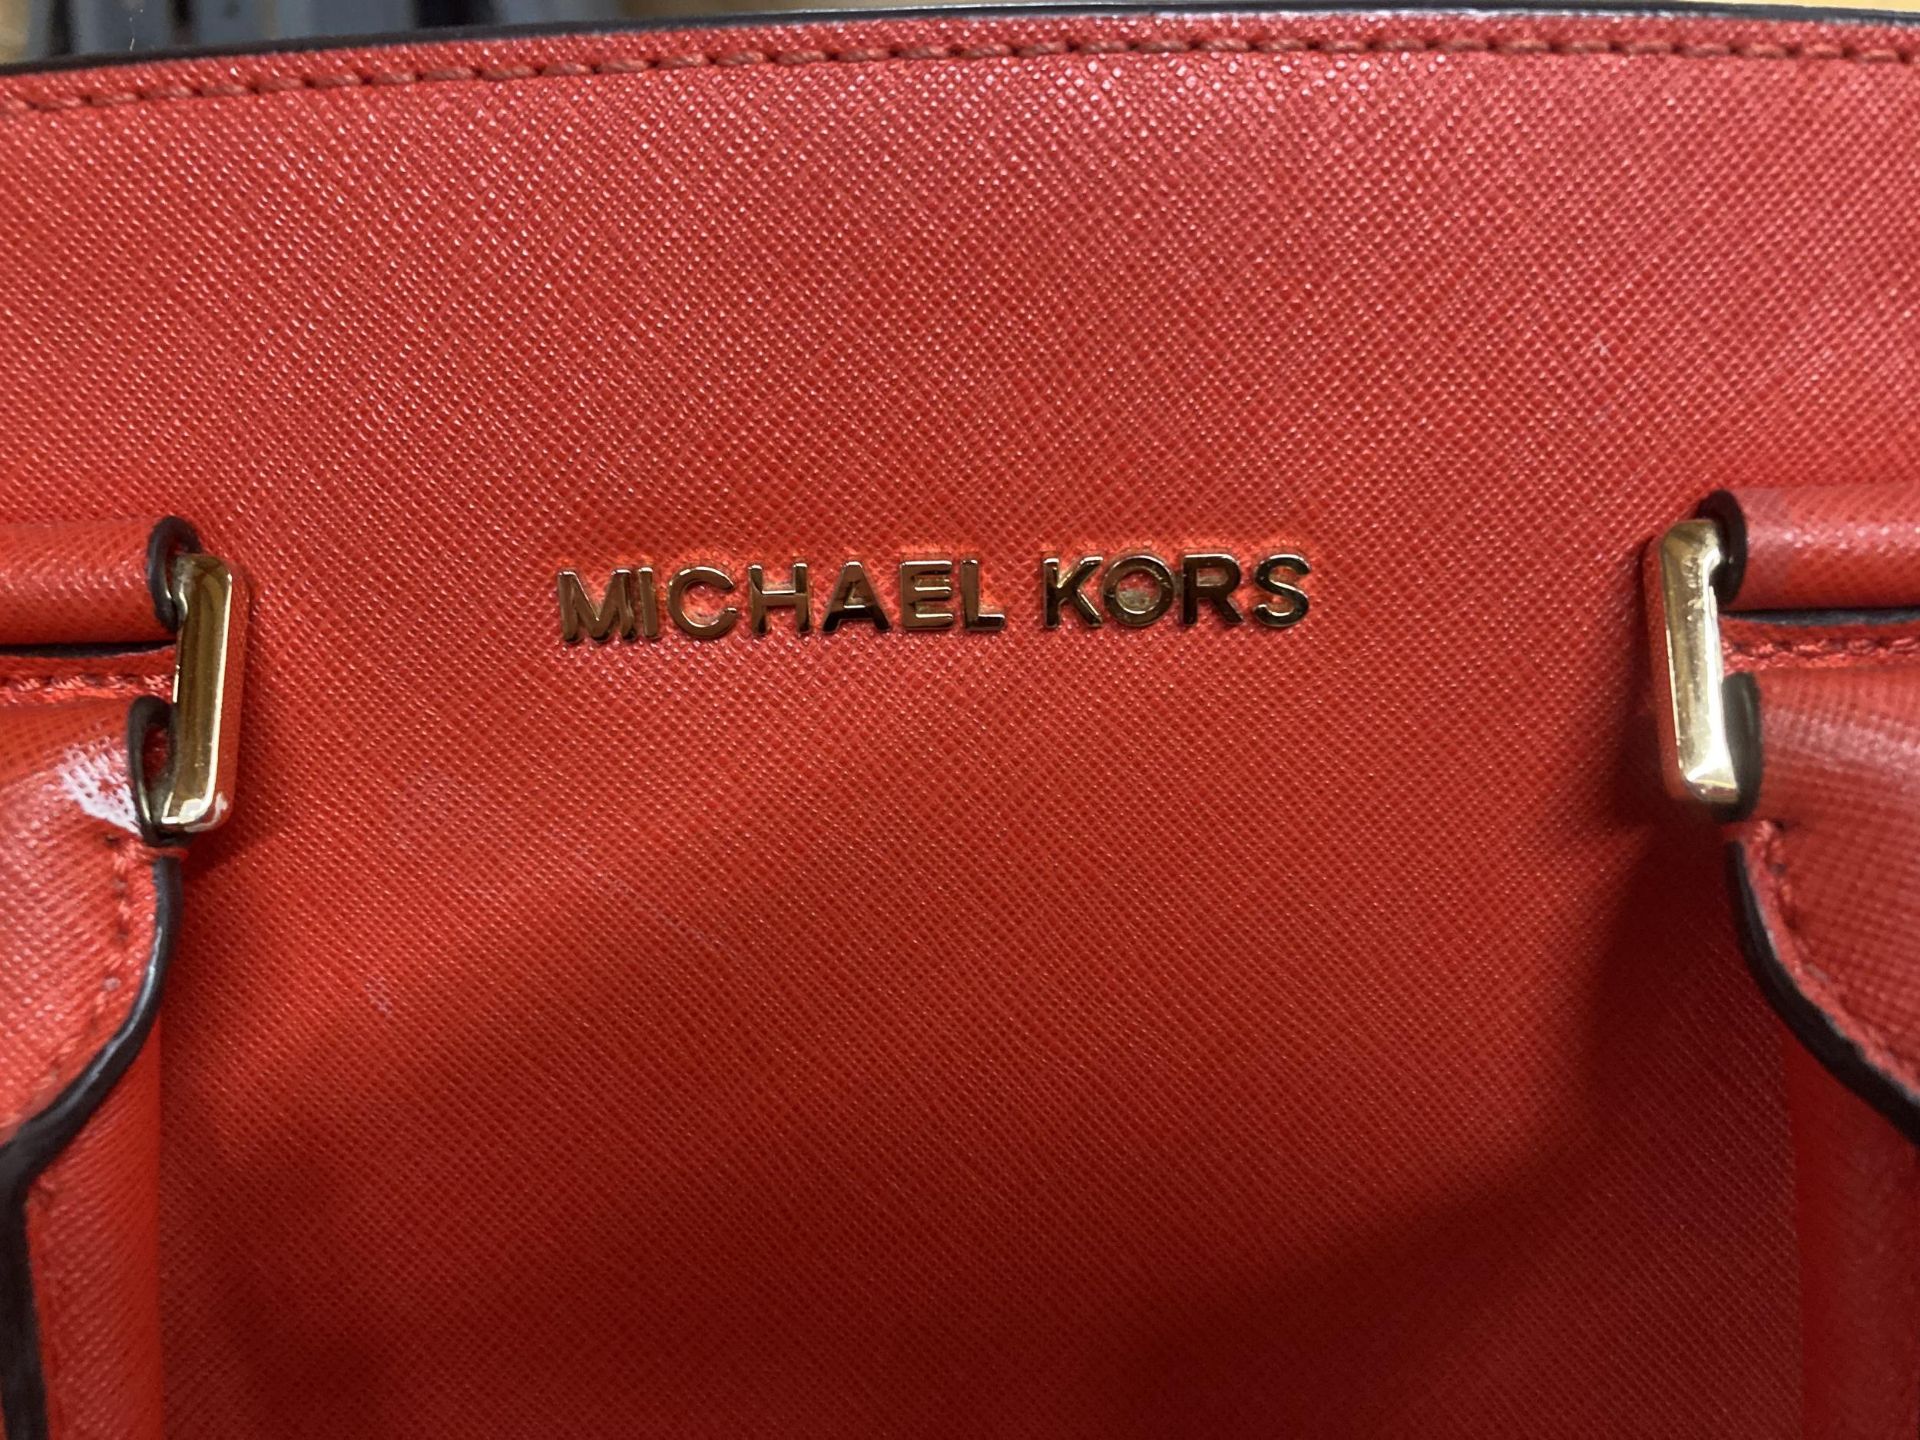 A MICHAEL KORS RED HANDBAG WITH DUST JACKET - Image 2 of 2